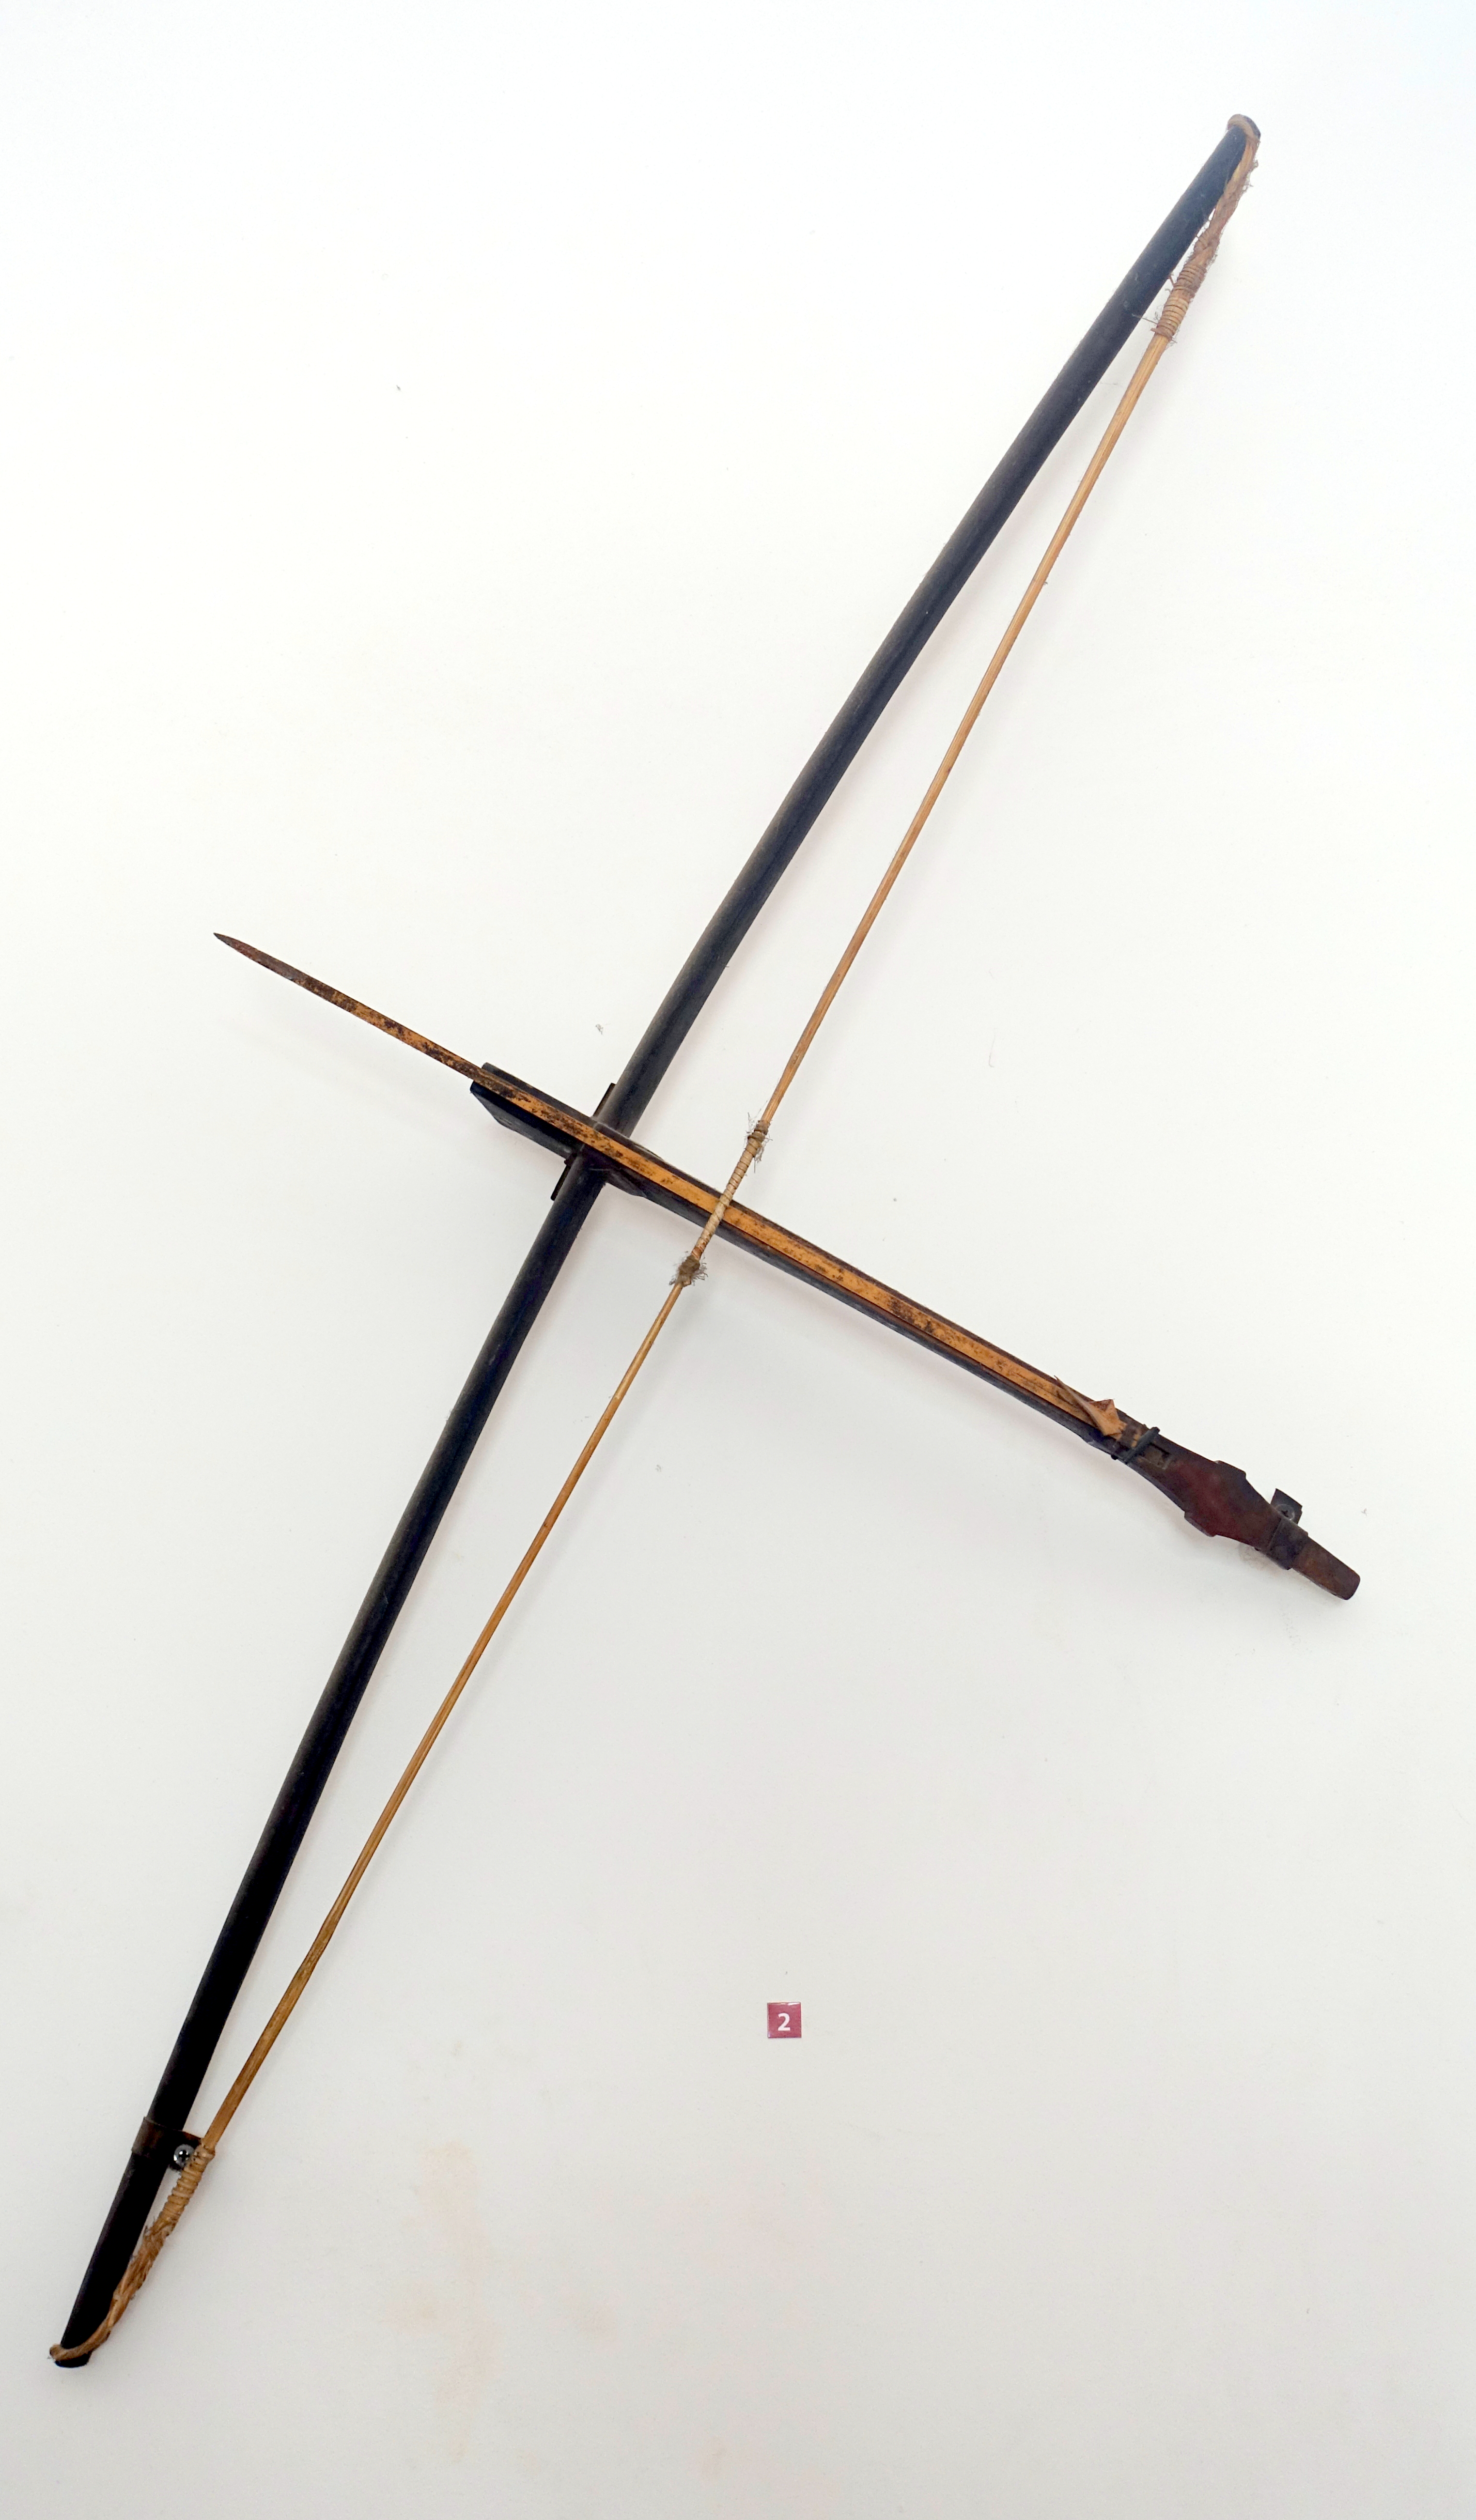 The Austroasiatic crossbow which is also known as the Hmong crossbow, the Jarai crossbow, or the Angkorian crossbow is a crossbow used for war and for hunting in Southeastern Asia. It has become a symbol of pride and identity for ethnic groups from Myanmar (Burma) to the confines of Indochina.